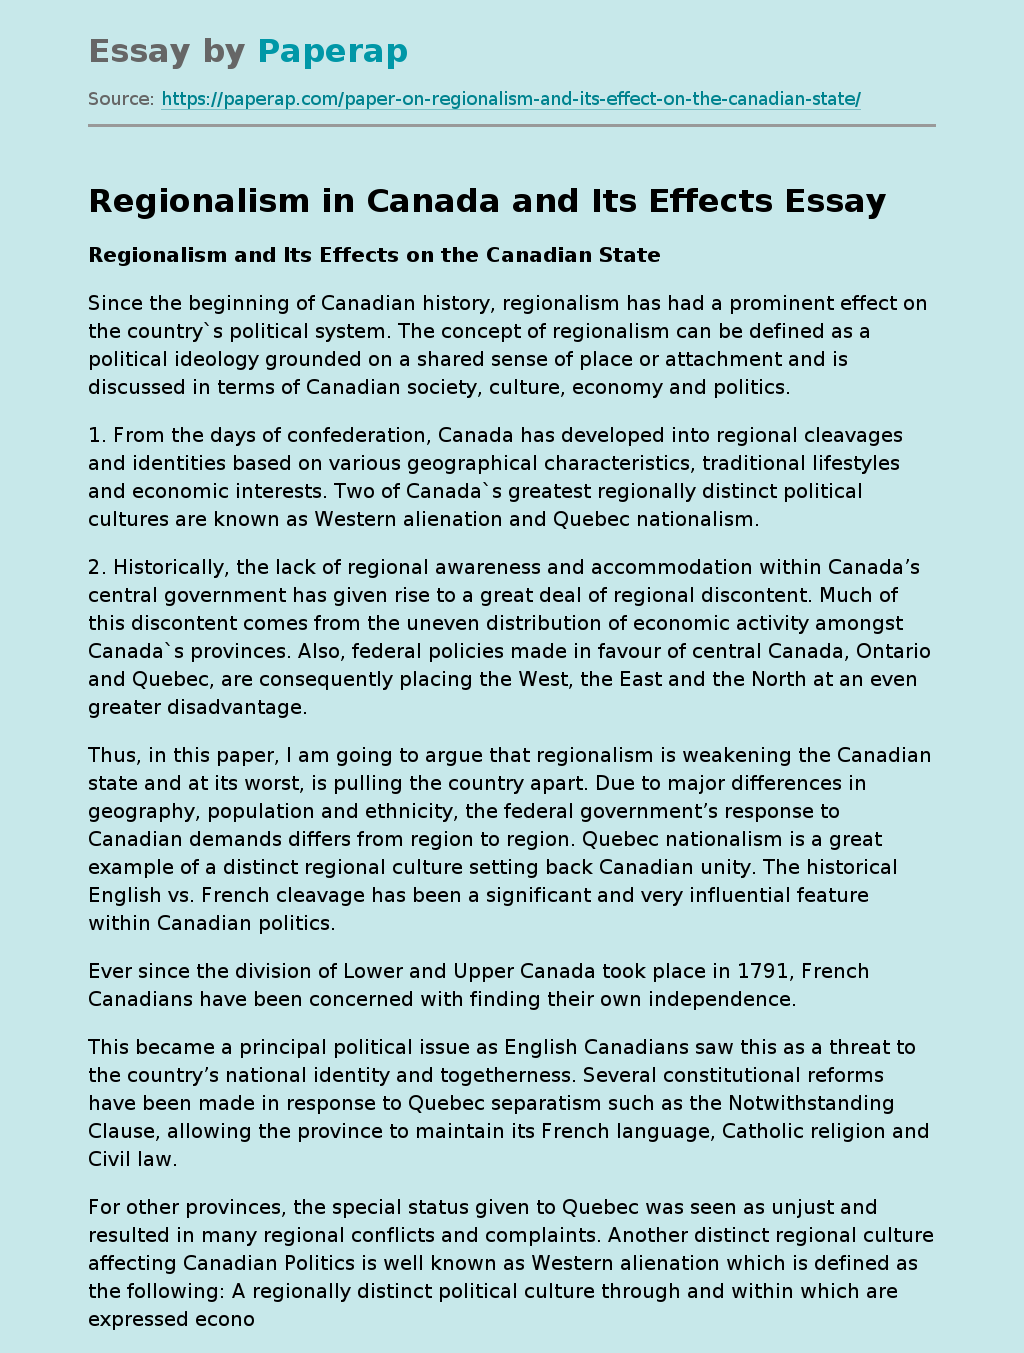 Regionalism in Canada and Its Effects